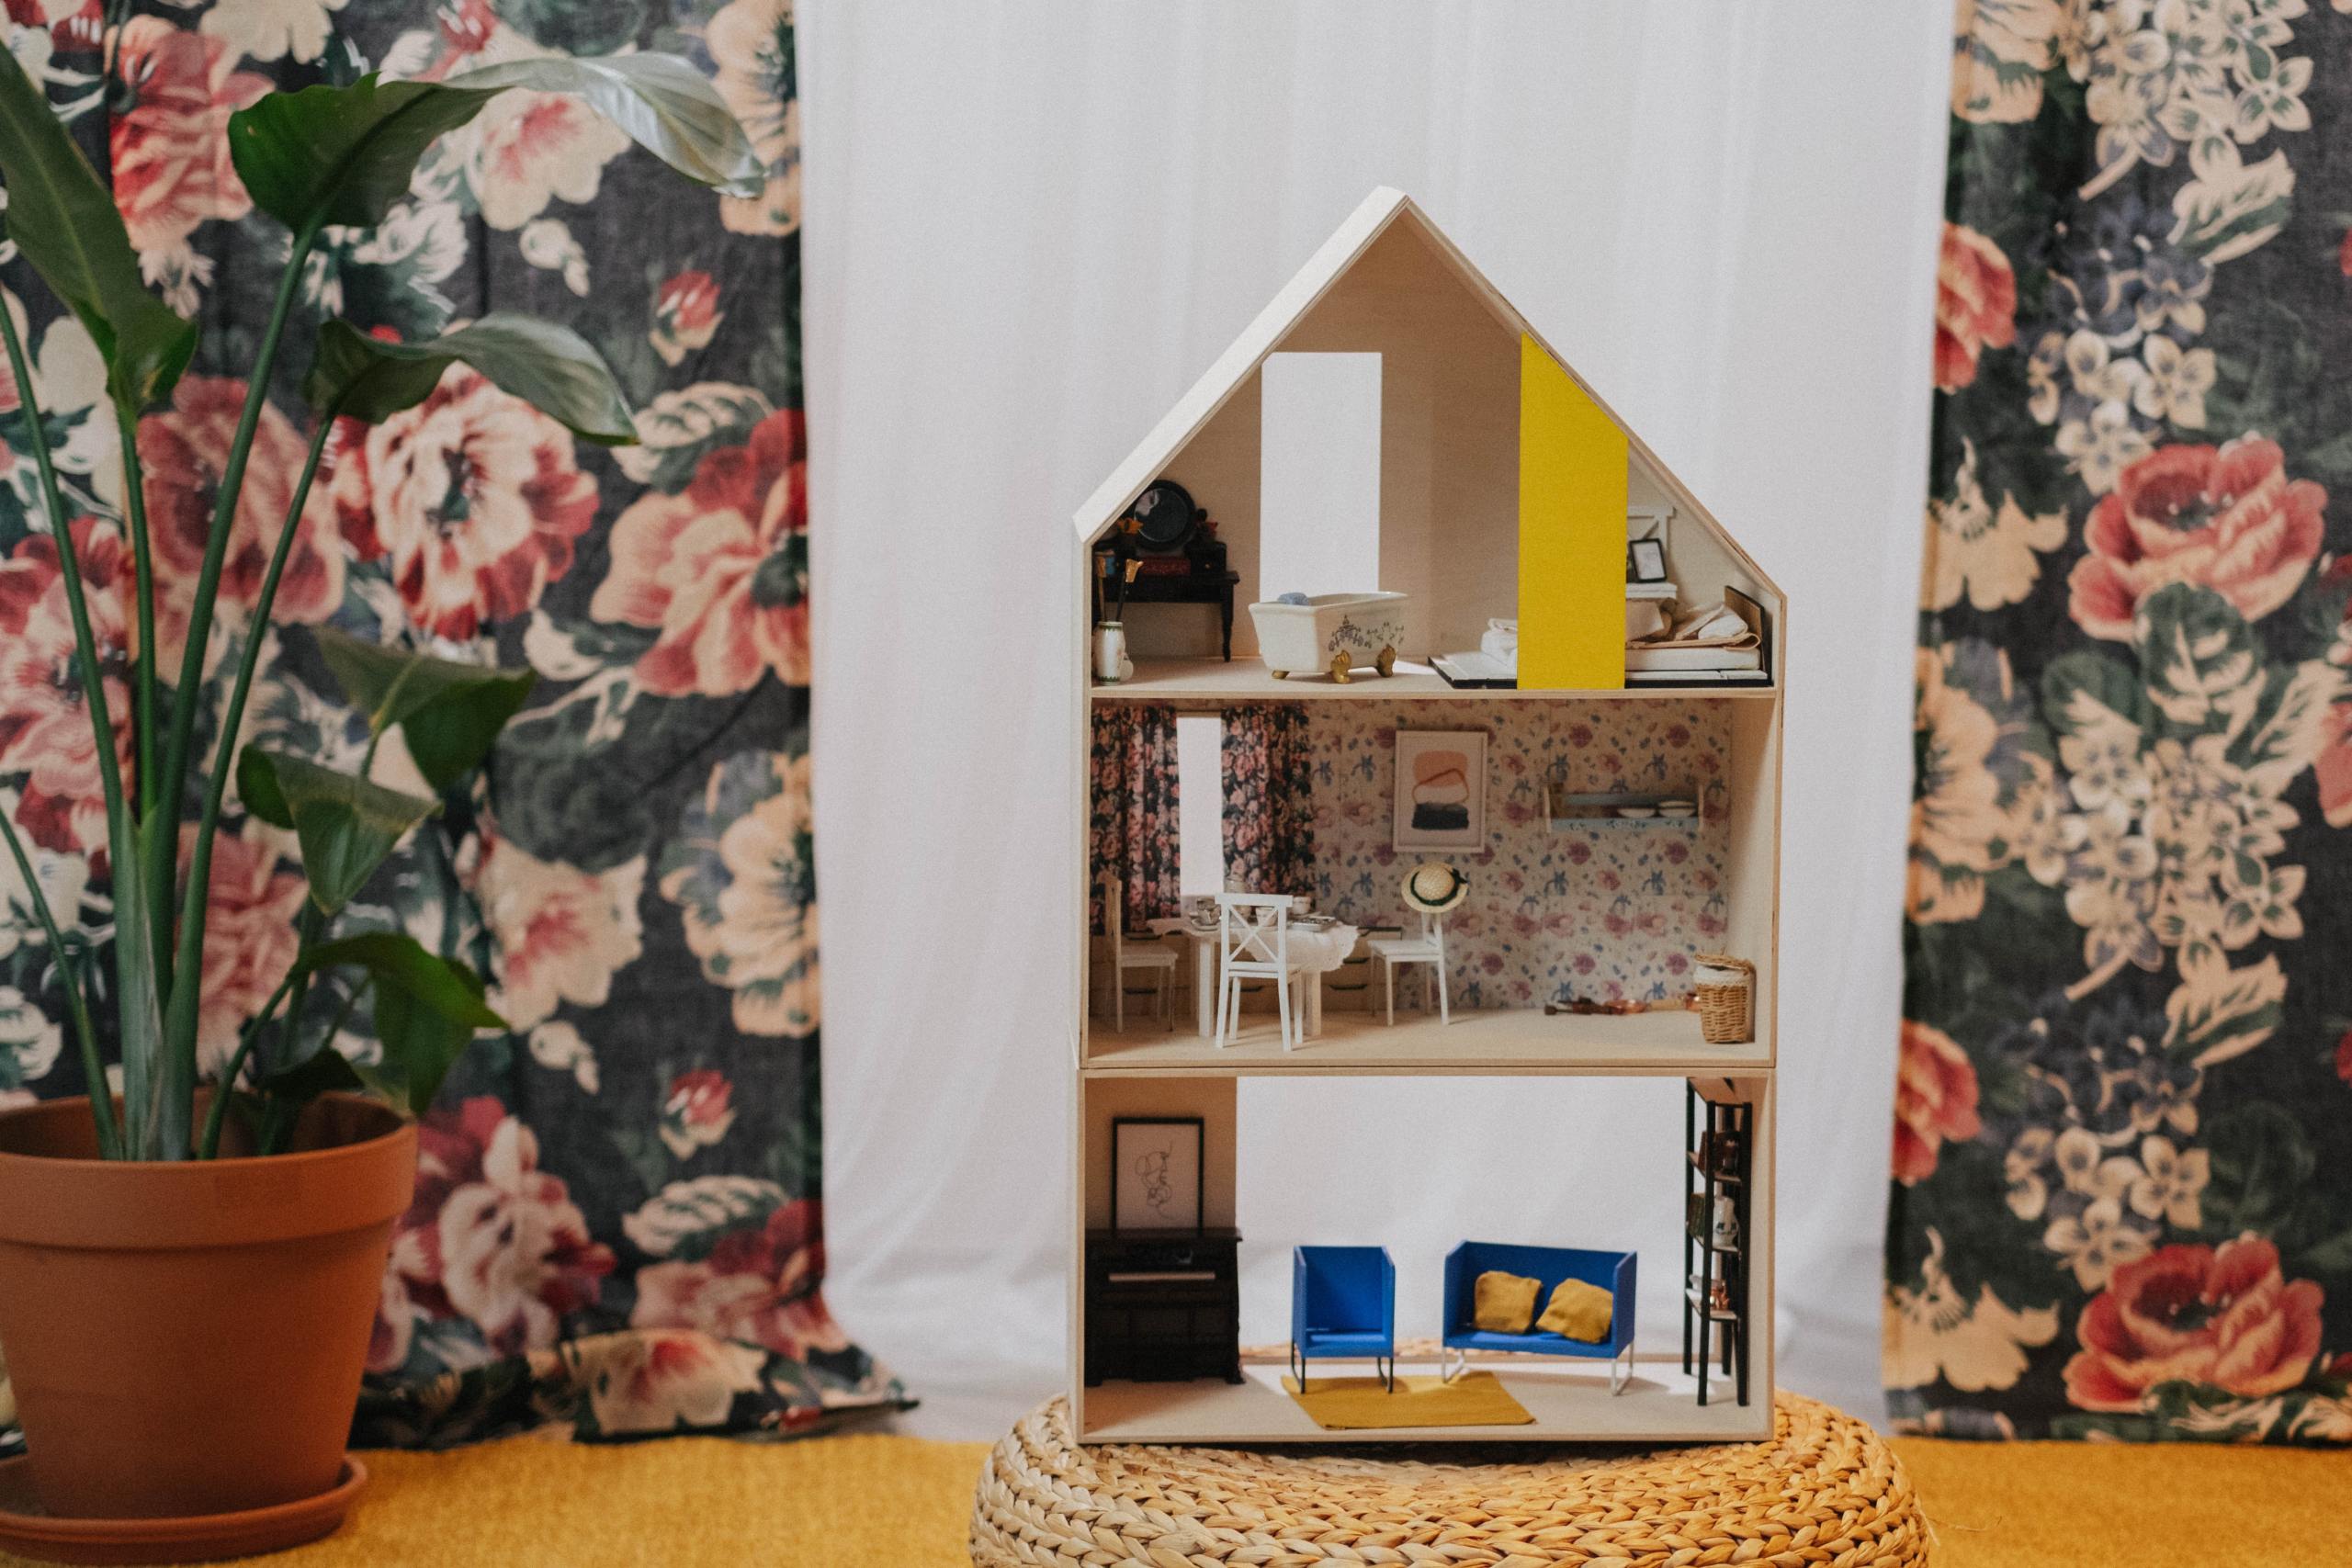 How To Create The Haunted Dollhouses That Went Viral On TikTok